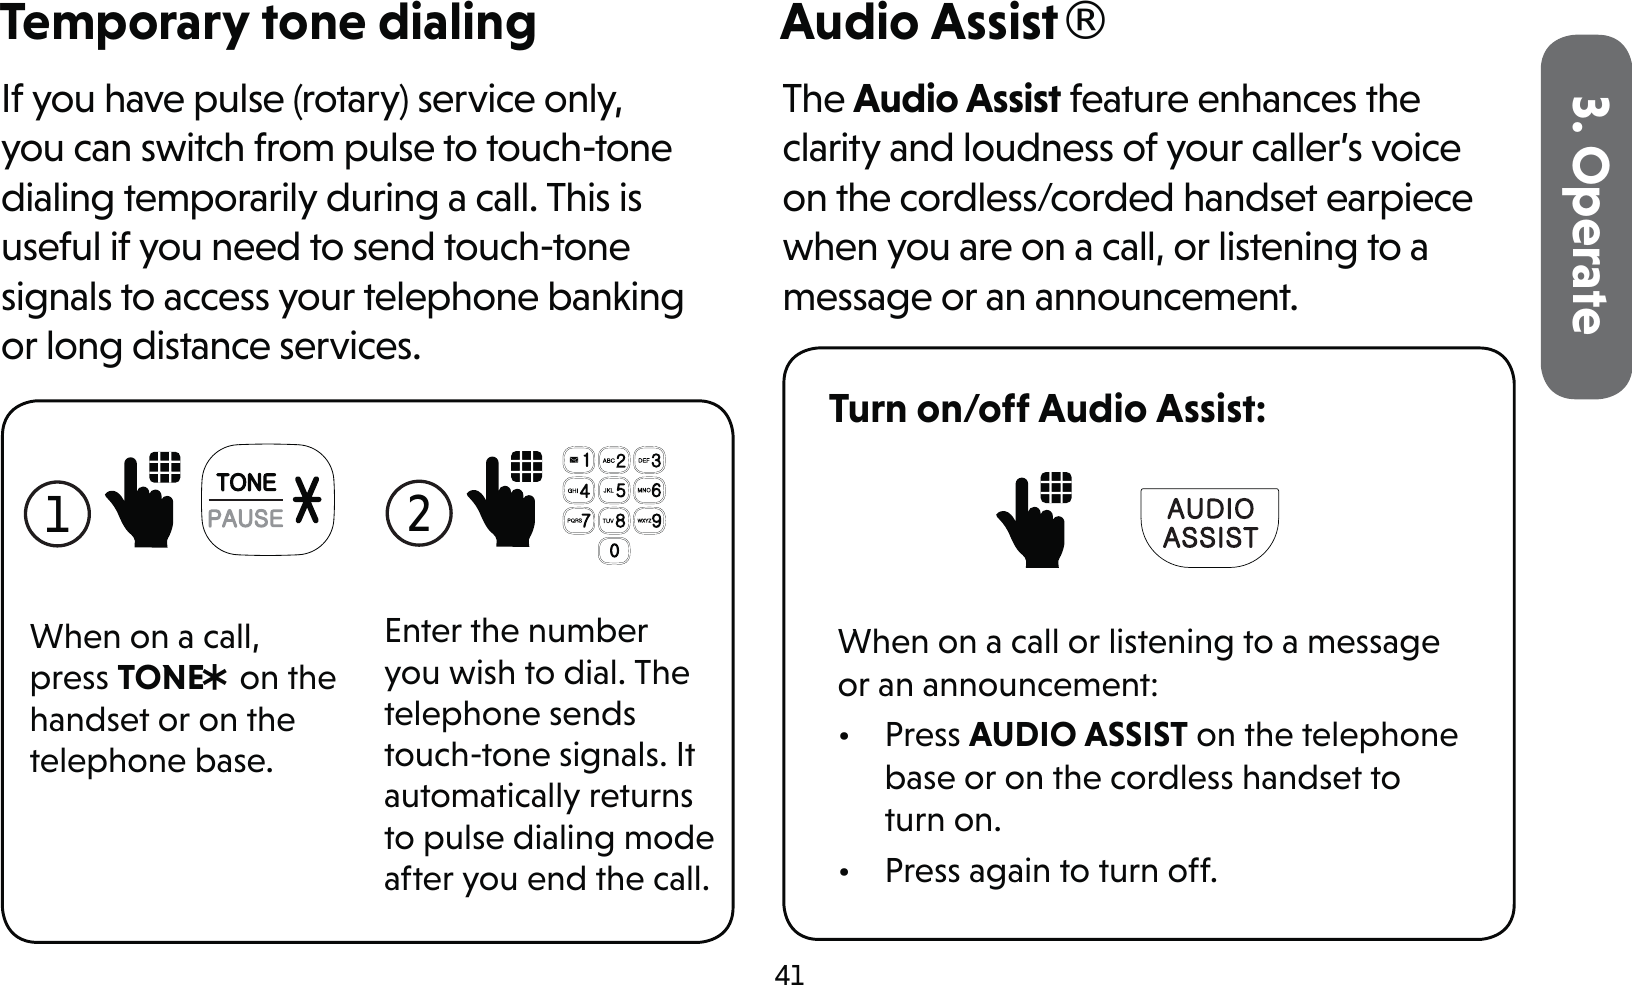 413. OperateTemporary tone dialingIf you have pulse (rotary) service only, you can switch from pulse to touch-tone dialing temporarily during a call. This is useful if you need to send touch-tone signals to access your telephone banking or long distance services.1 When on a call, press TONE* on the handset or on the telephone base.2 Enter the number you wish to dial. The telephone sends touch-tone signals. It automatically returns to pulse dialing mode after you end the call.Audio Assist®The Audio Assist feature enhances the clarity and loudness of your caller’s voice on the cordless/corded handset earpiece when you are on a call, or listening to a message or an announcement.Turn on/off Audio Assist: When on a call or listening to a message or an announcement:• Press AUDIO ASSIST on the telephone base or on the cordless handset to turn on.•  Press again to turn off.